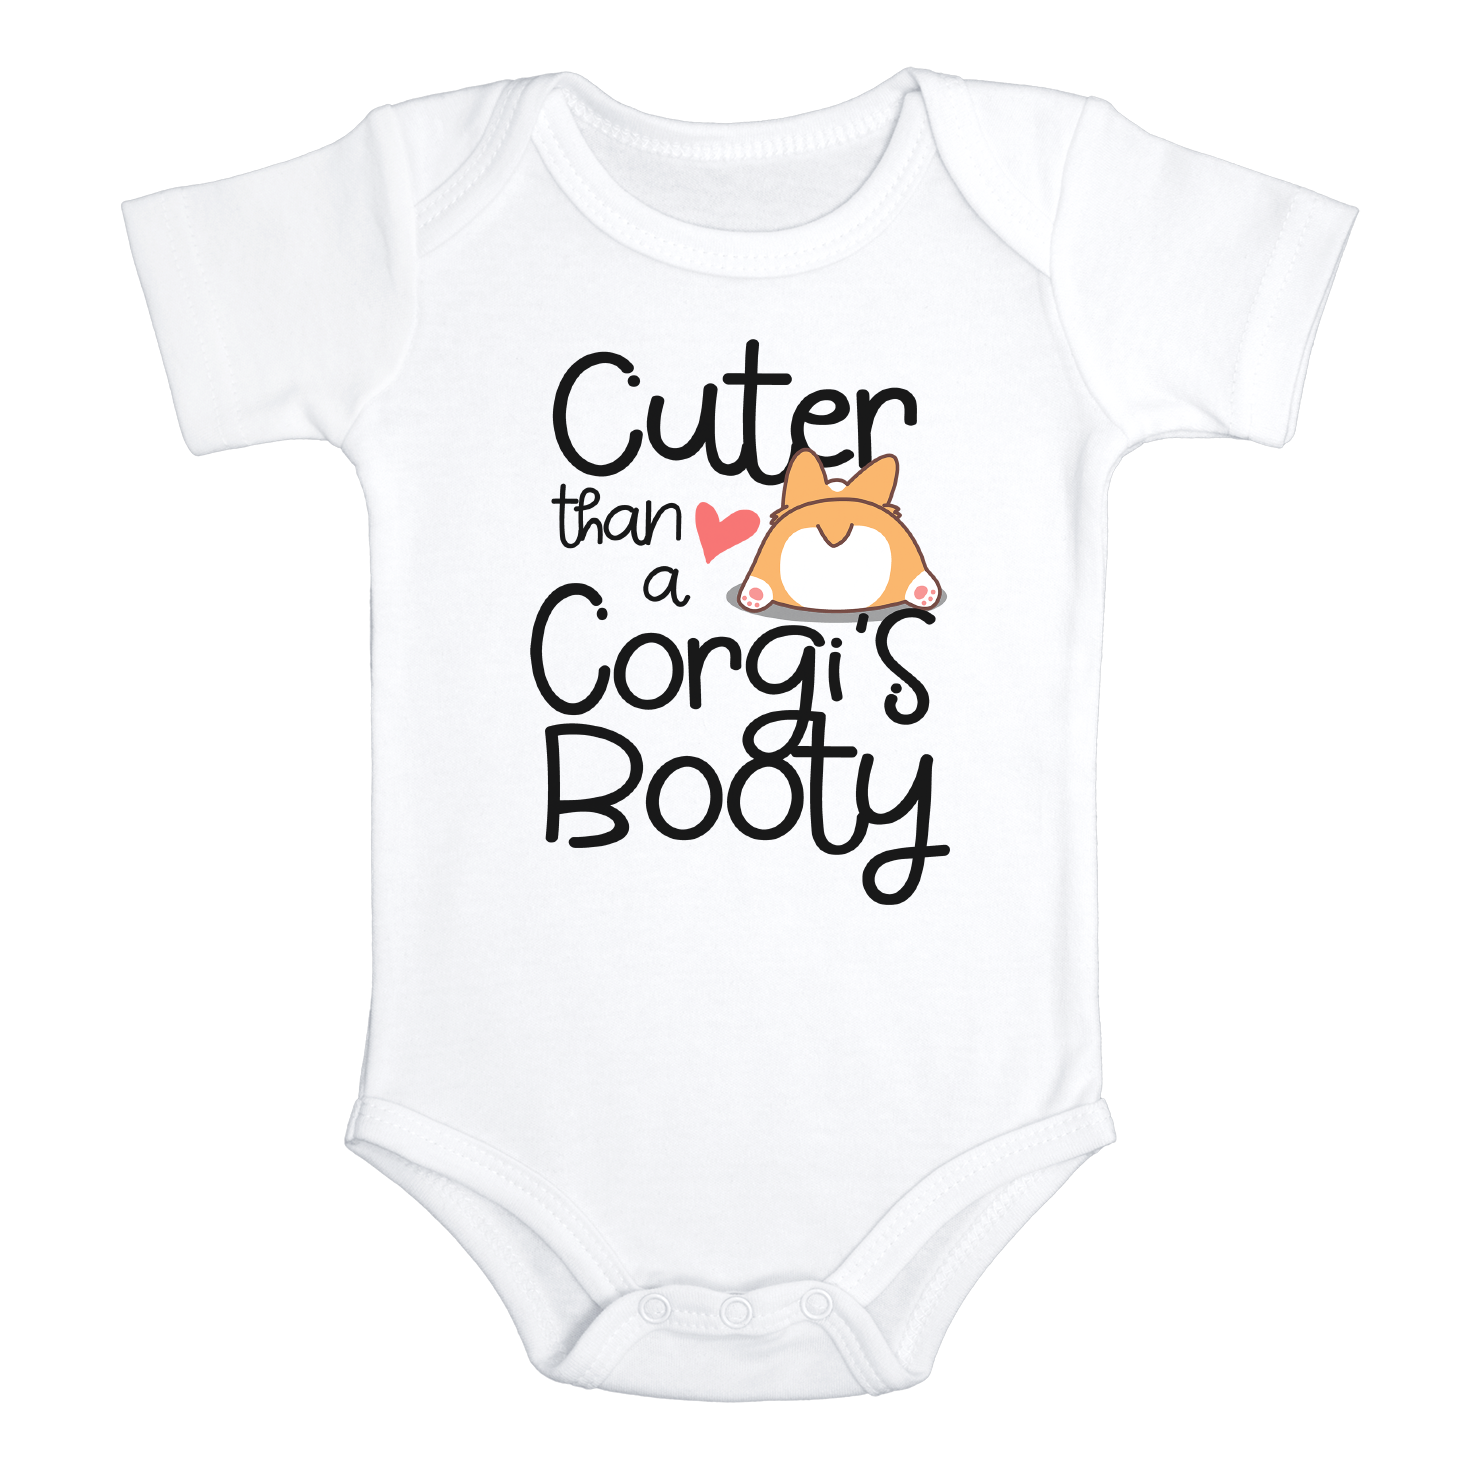 CUTER THAN A CORGI'S BOOTY Funny baby puppy onesies bodysuit (white: short or long sleeve)